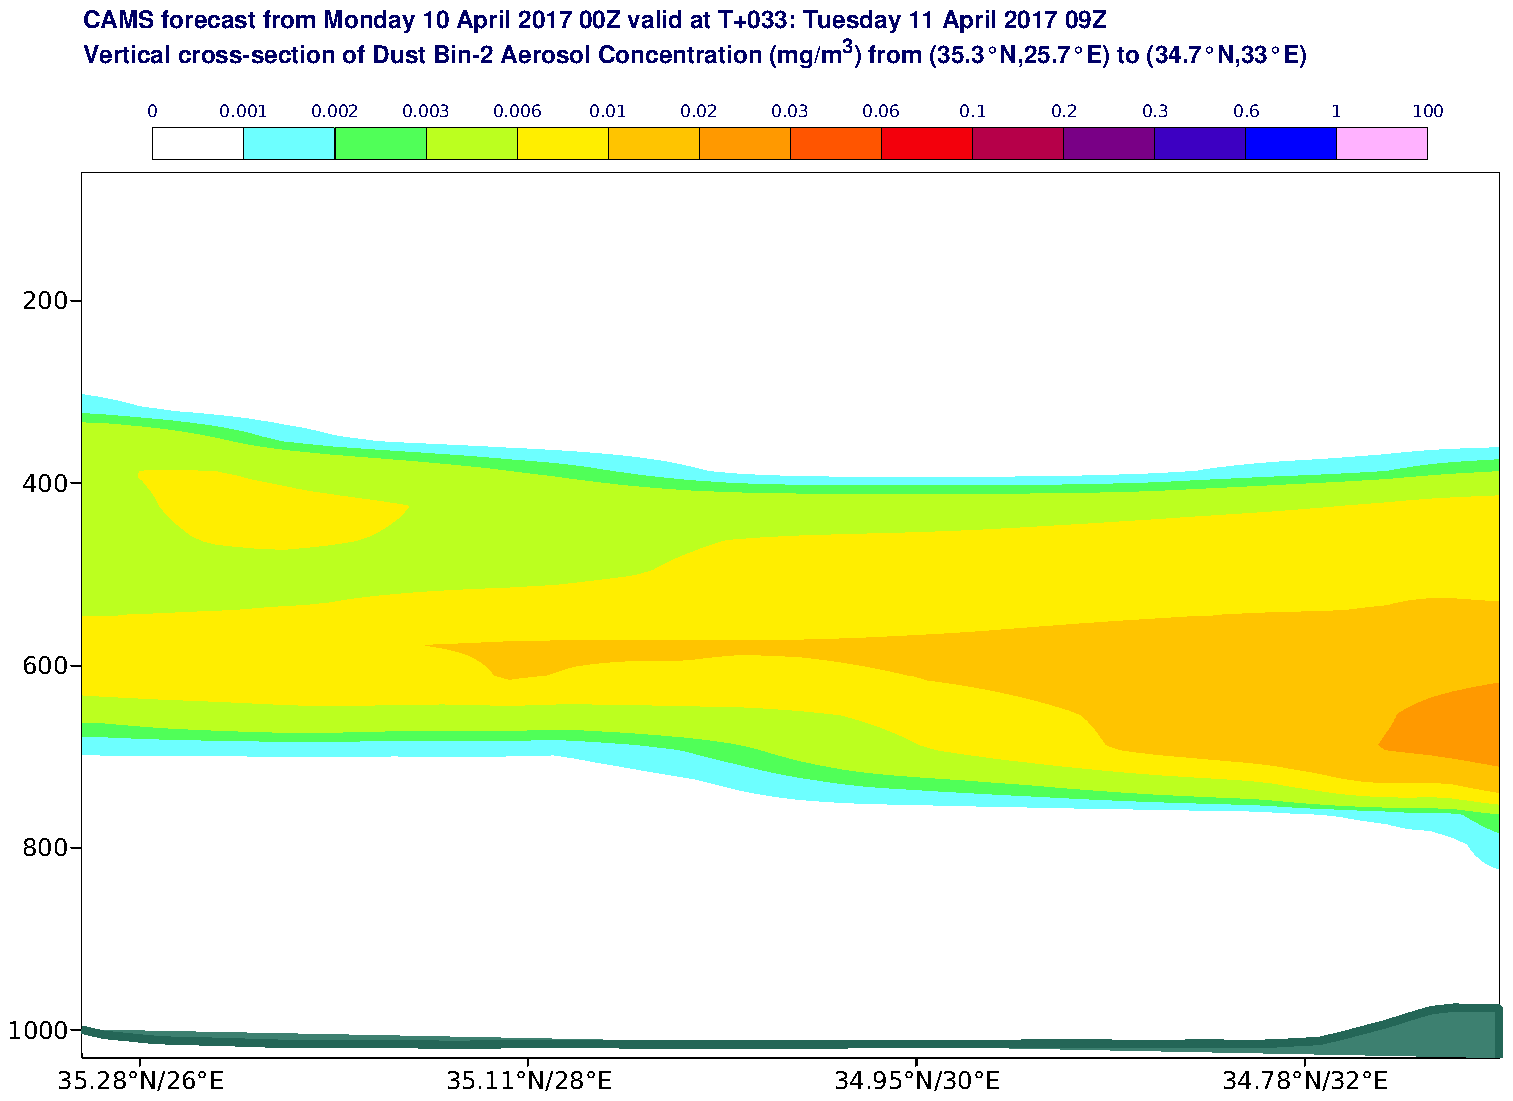 Vertical cross-section of Dust Bin-2 Aerosol Concentration (mg/m3) valid at T33 - 2017-04-11 09:00